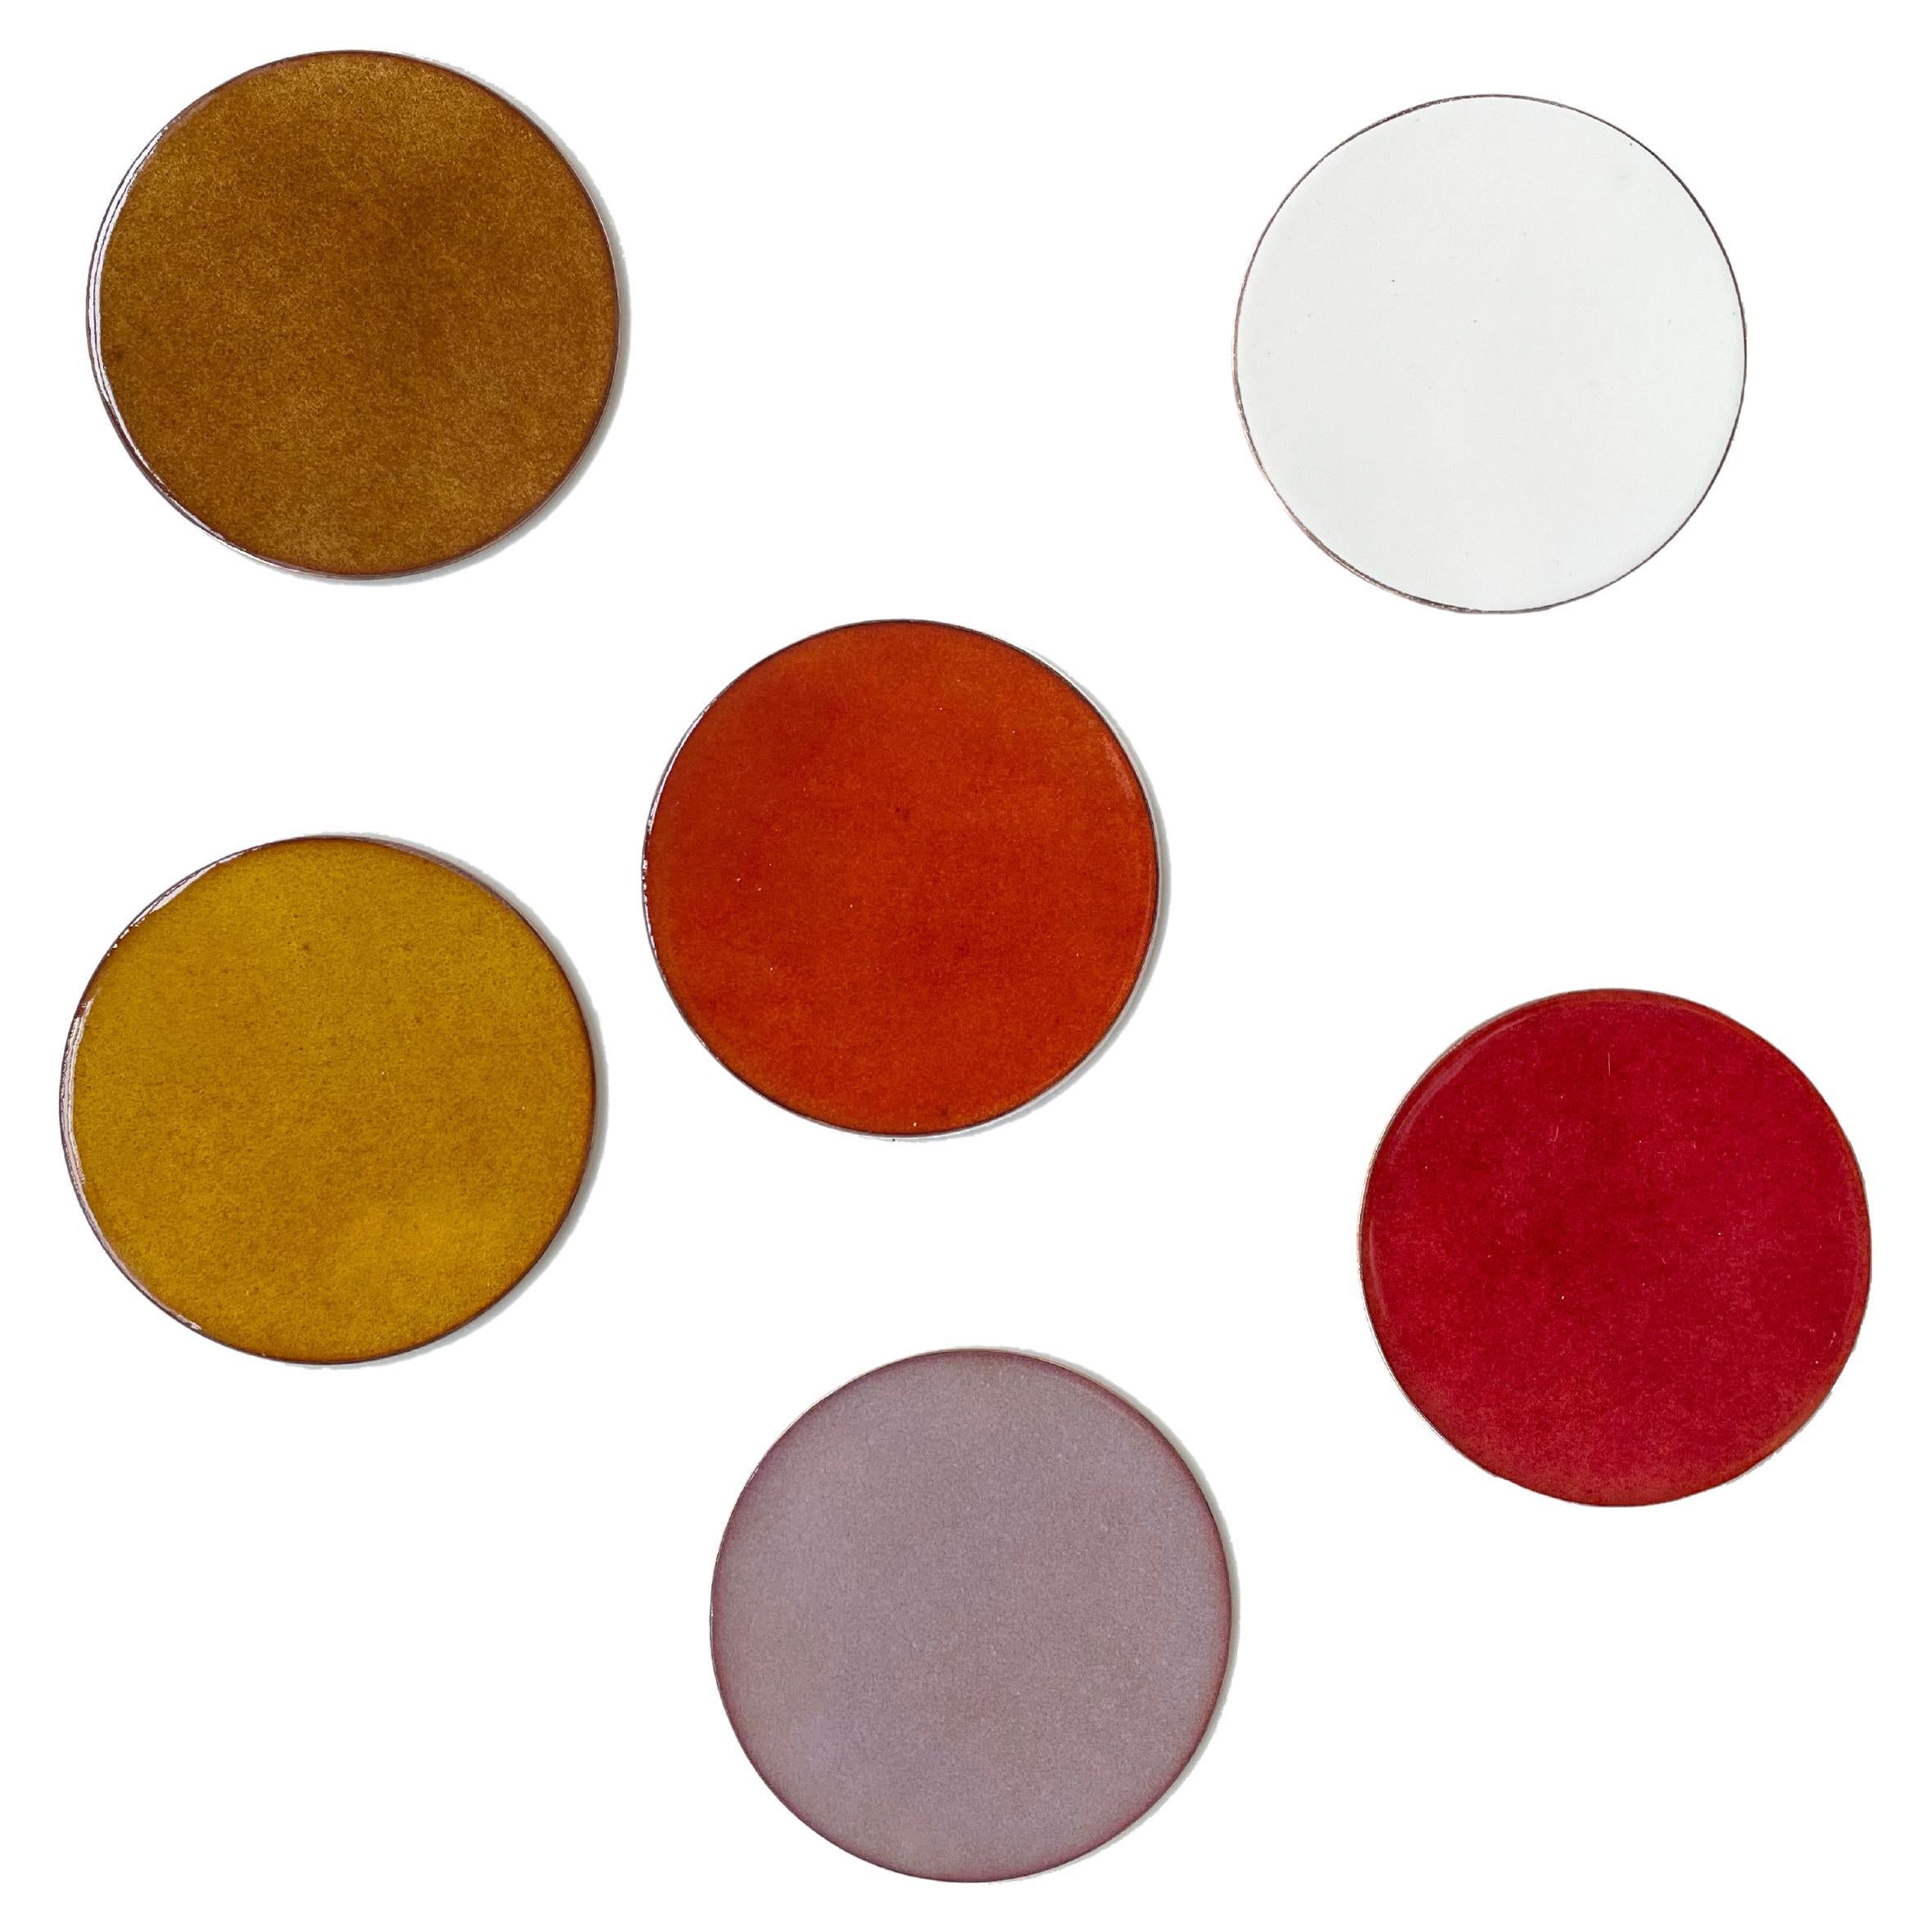 Waifs, Coasters in Wafer Thin Vitreous Enamels, Limited Production, Set of 6